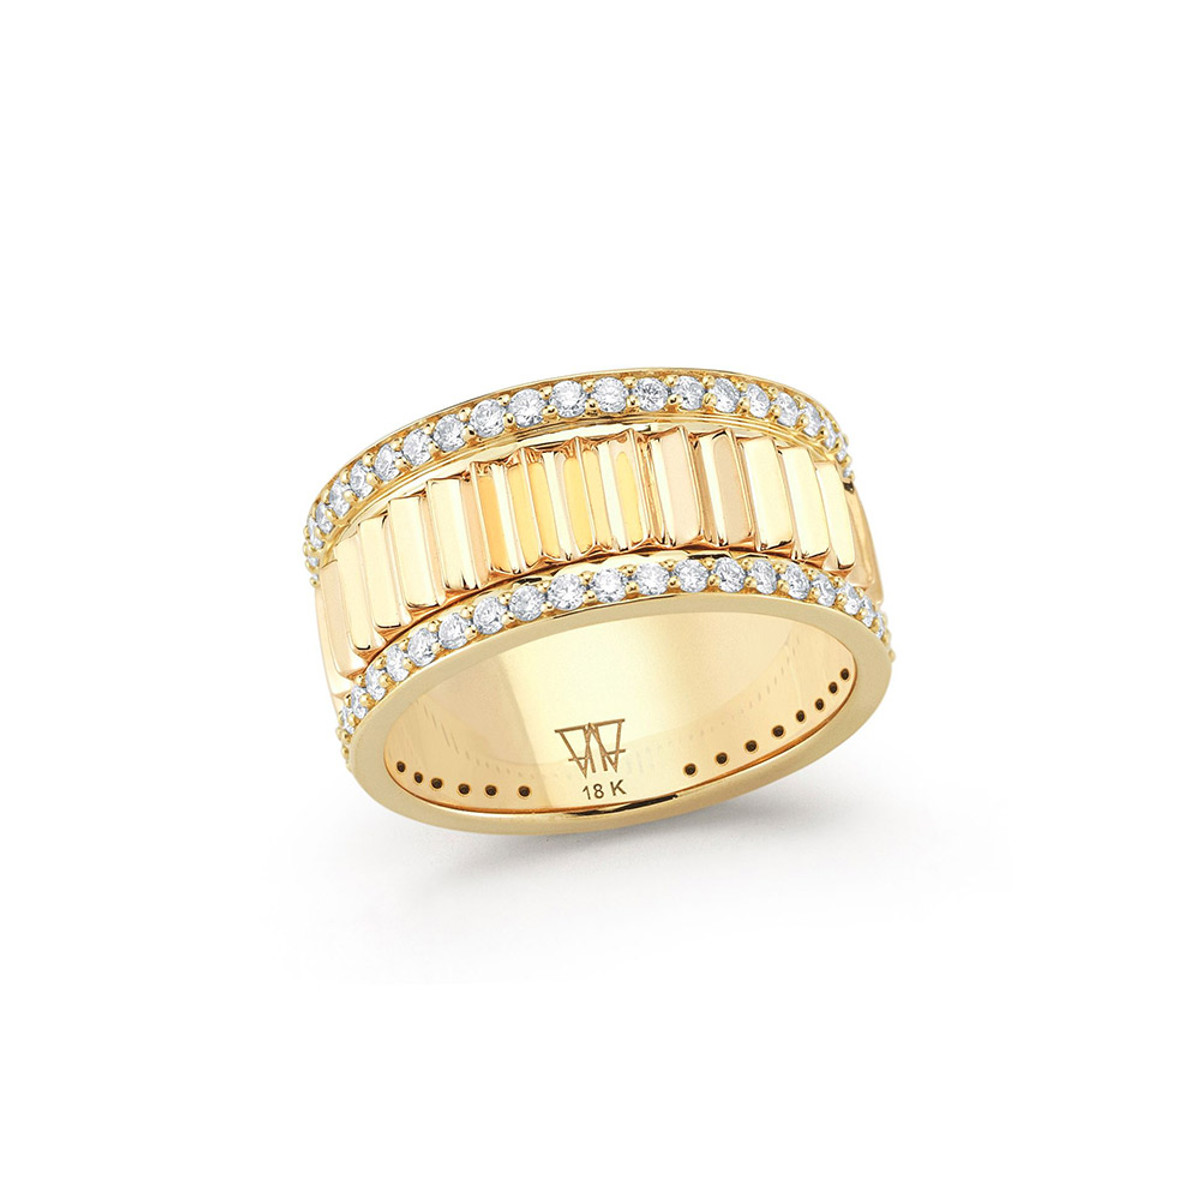 Walters Faith Clive 18K Yellow Gold and Diamond Fluted Ring-56169 Product Image